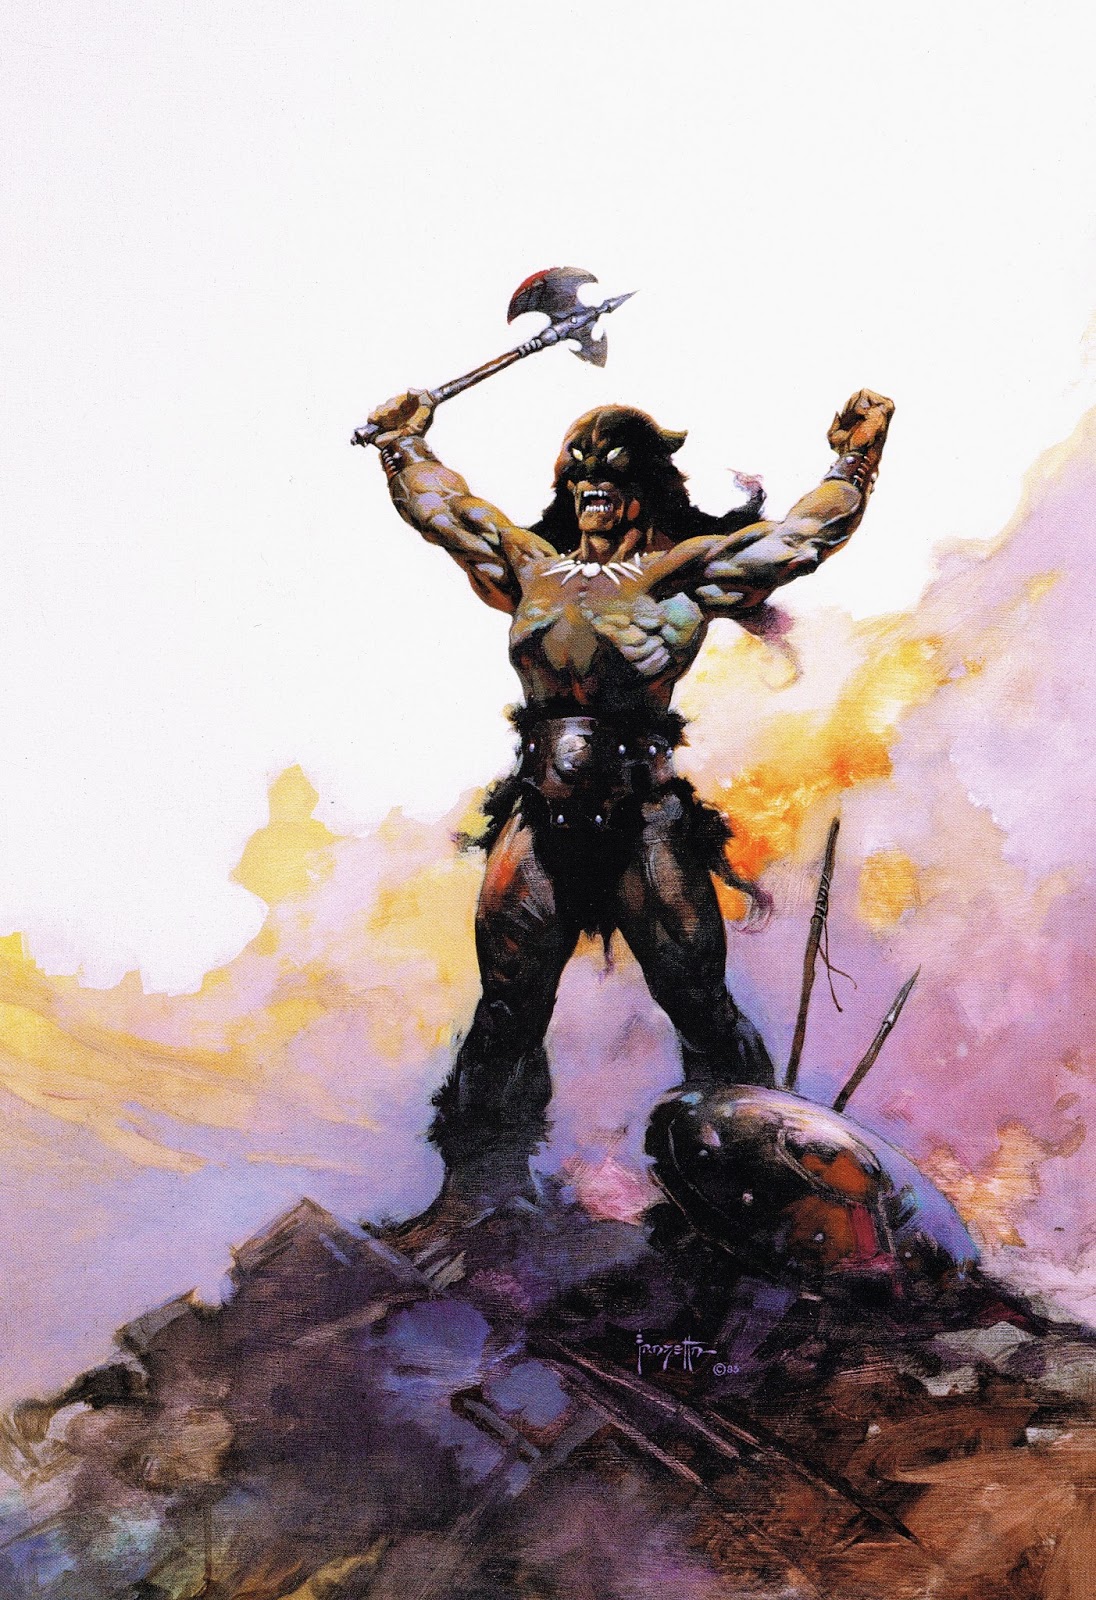 Cap'n's Comics: Rogues In The House by Frank Frazetta